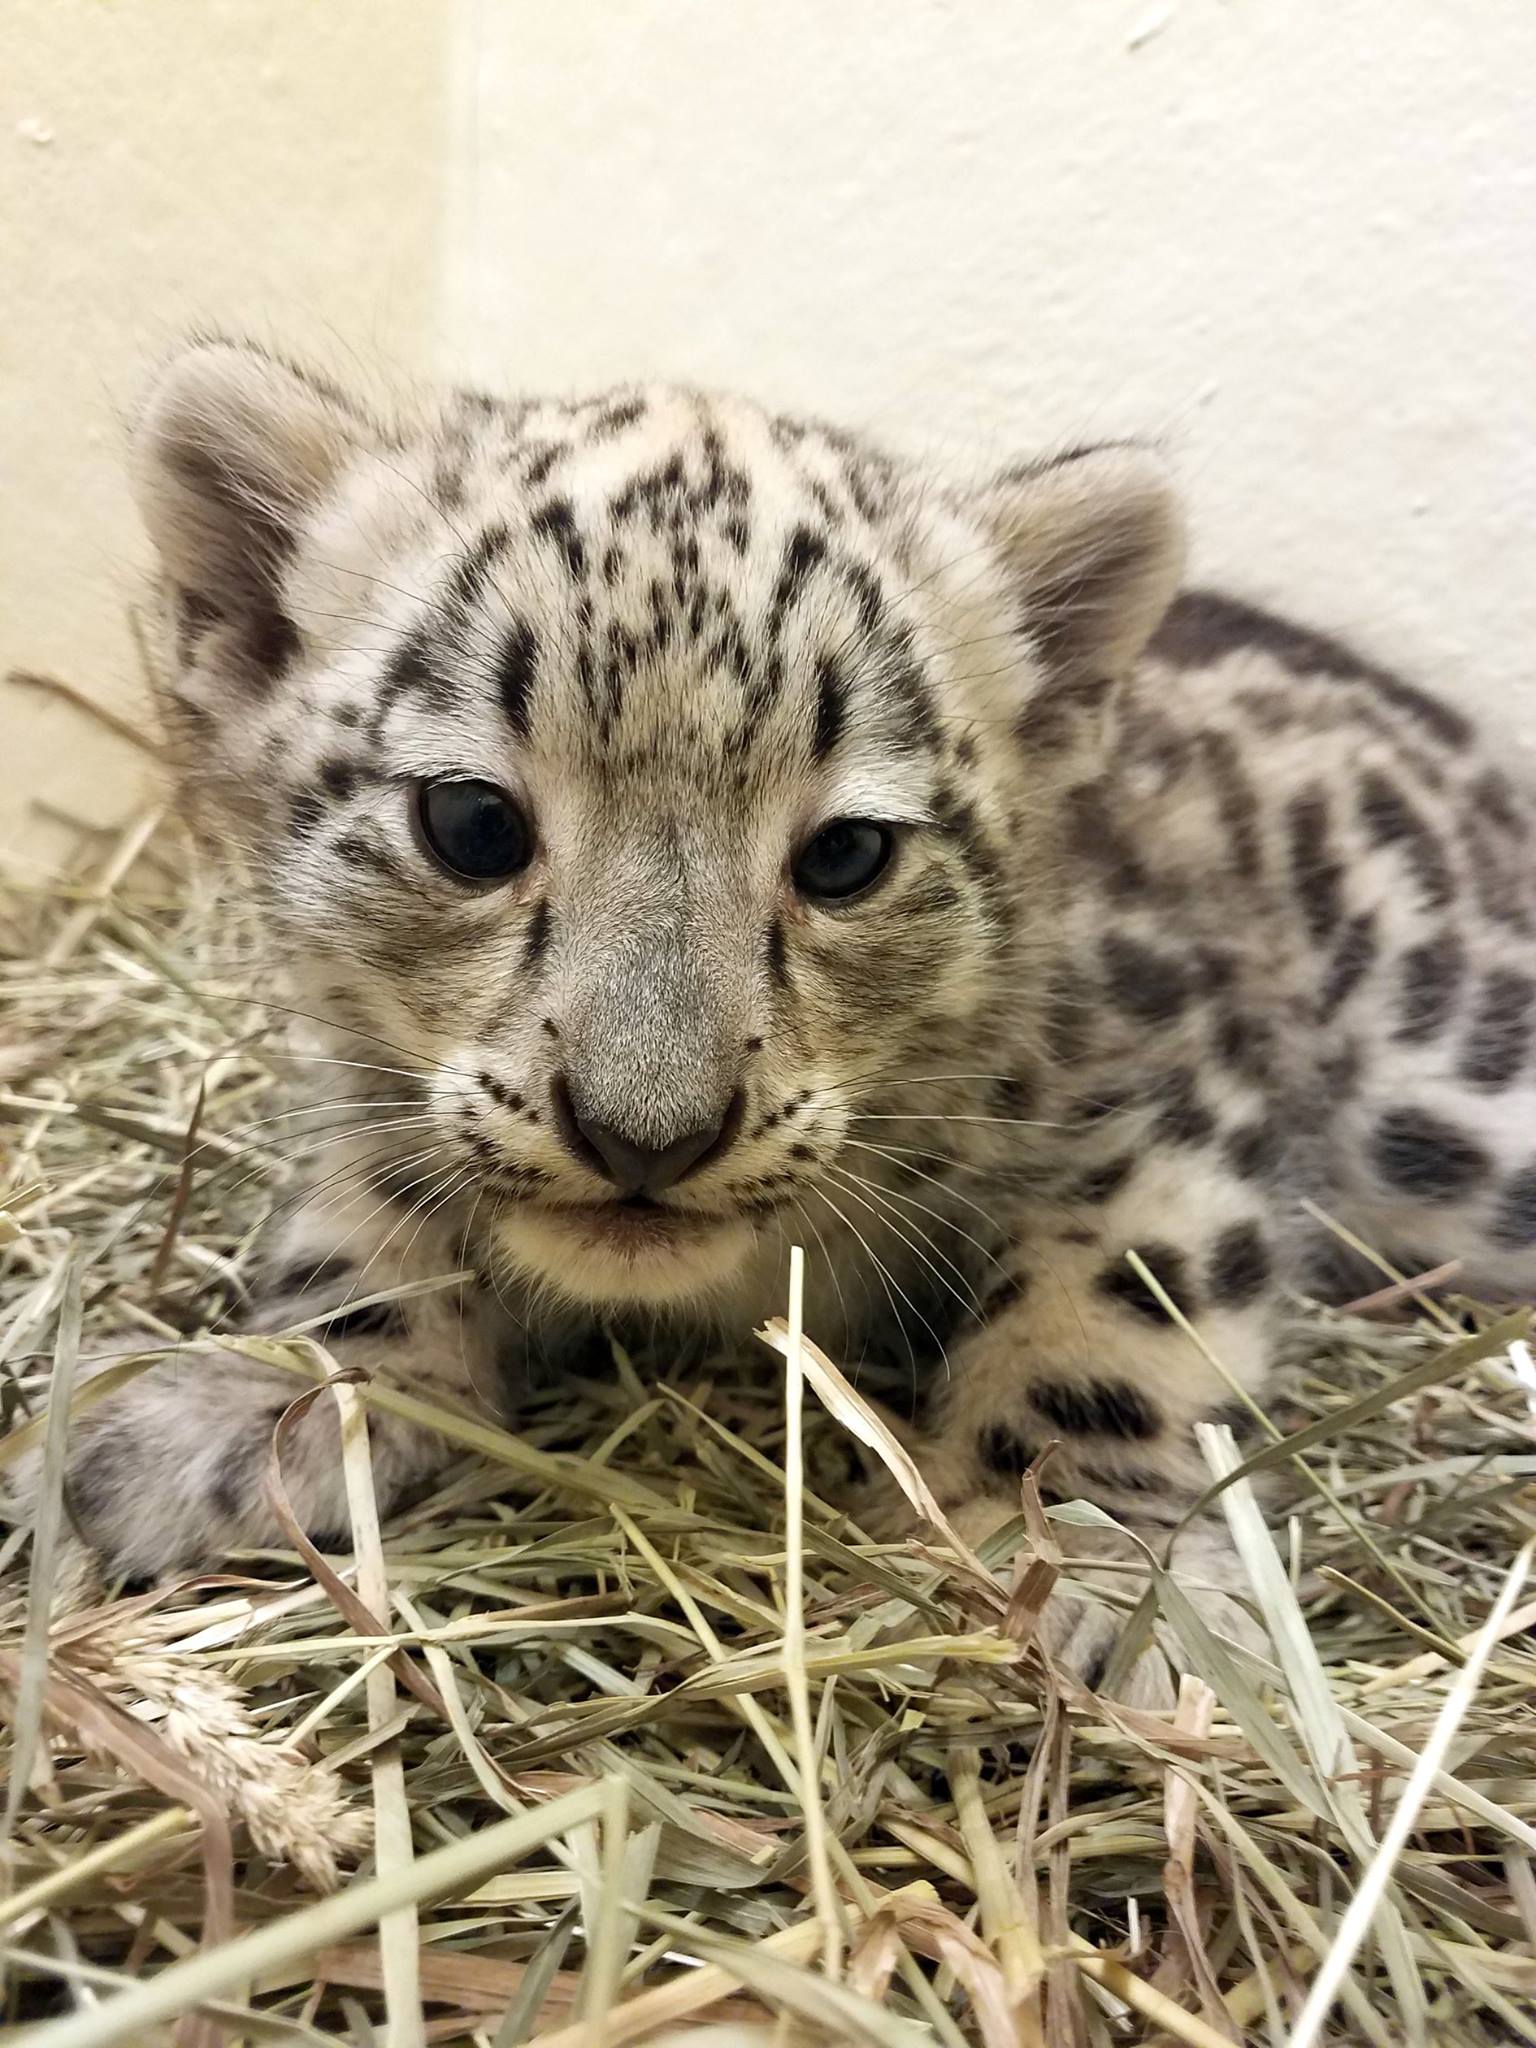 Cape May County Zoo Announces Birth Of Snow Leopard Cubs - CBS Philadelphia